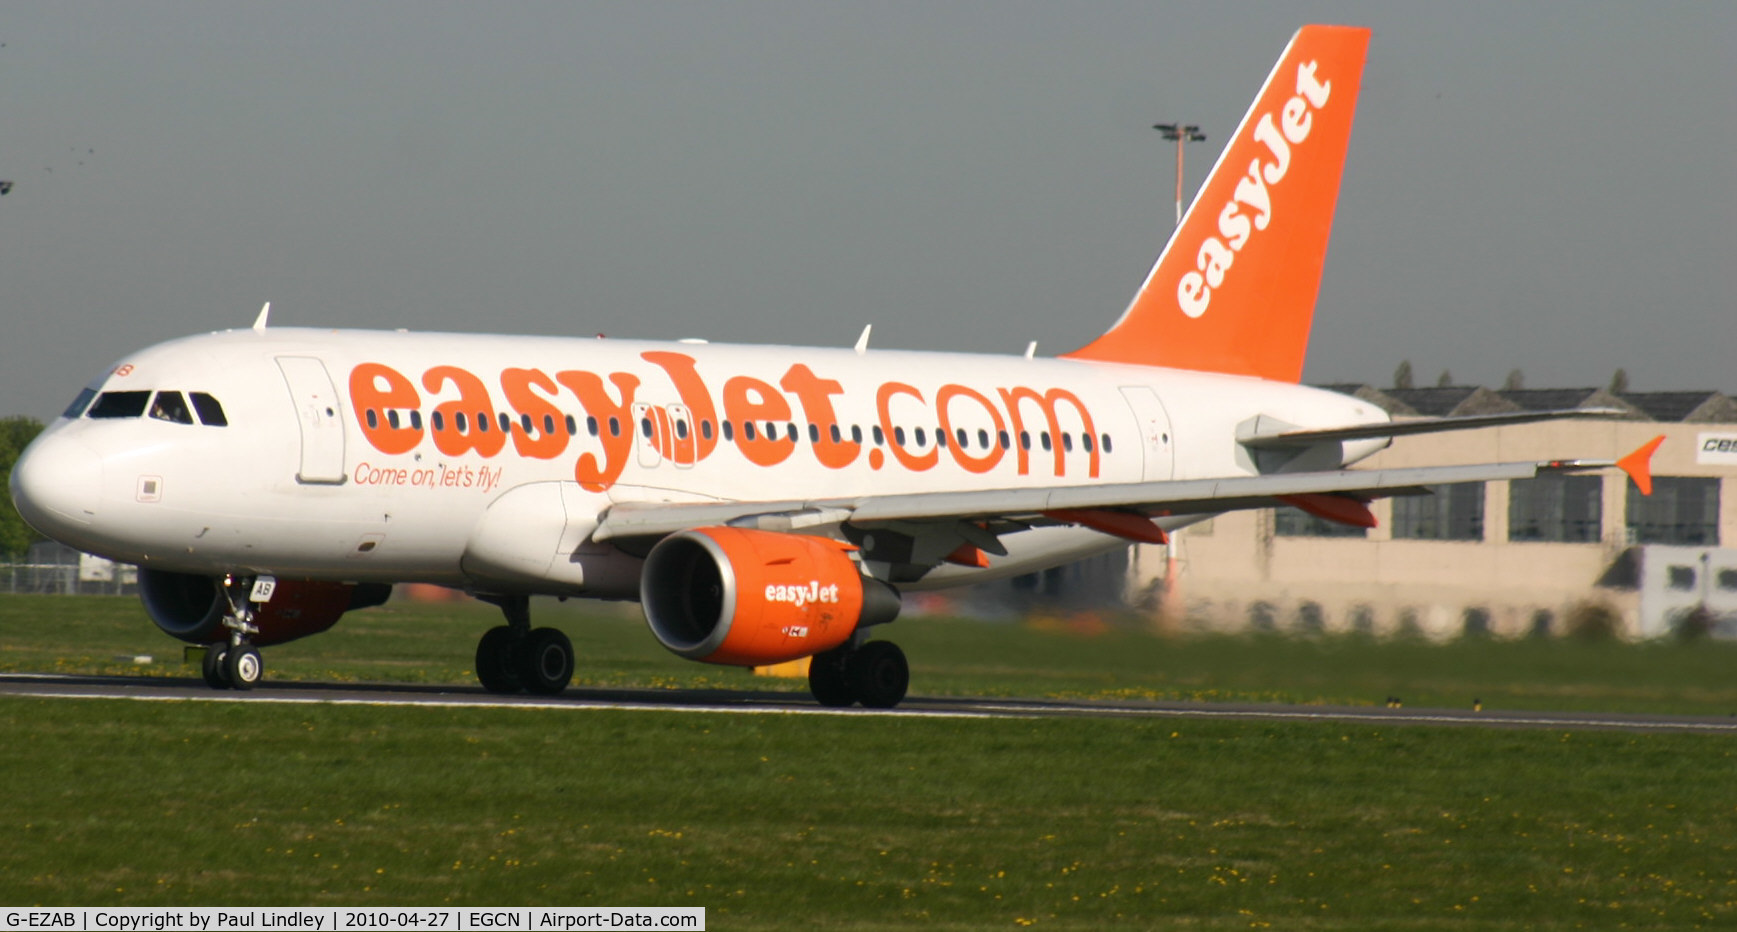 G-EZAB, 2006 Airbus A319-111 C/N 2681, New service at Doncaster - Sheffield